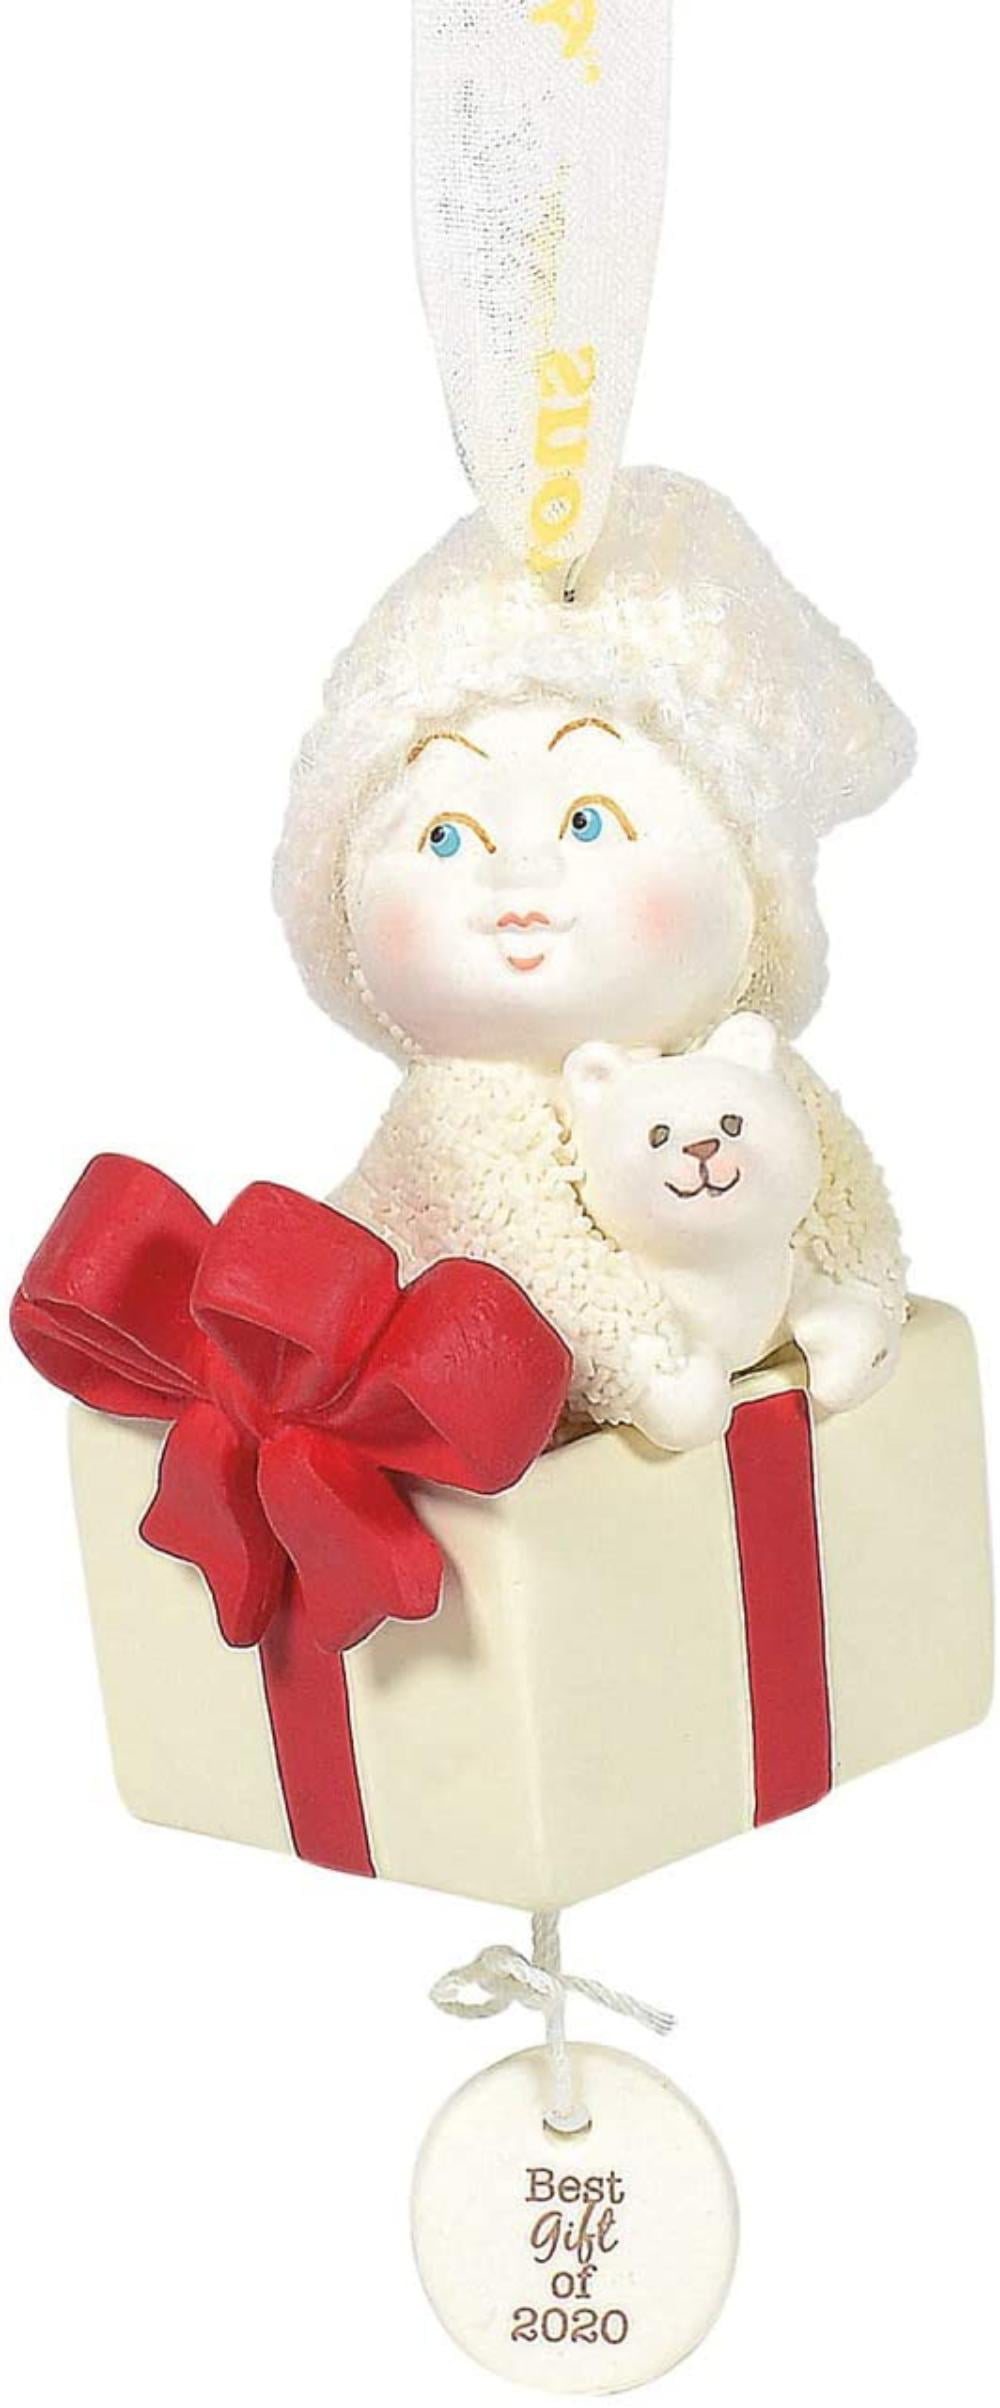 Snowbabies Joy For You And Me Snow Dream Bisque Porcelain Figurine Pre-Owned Great Condition 25 Years & Still Dreaming